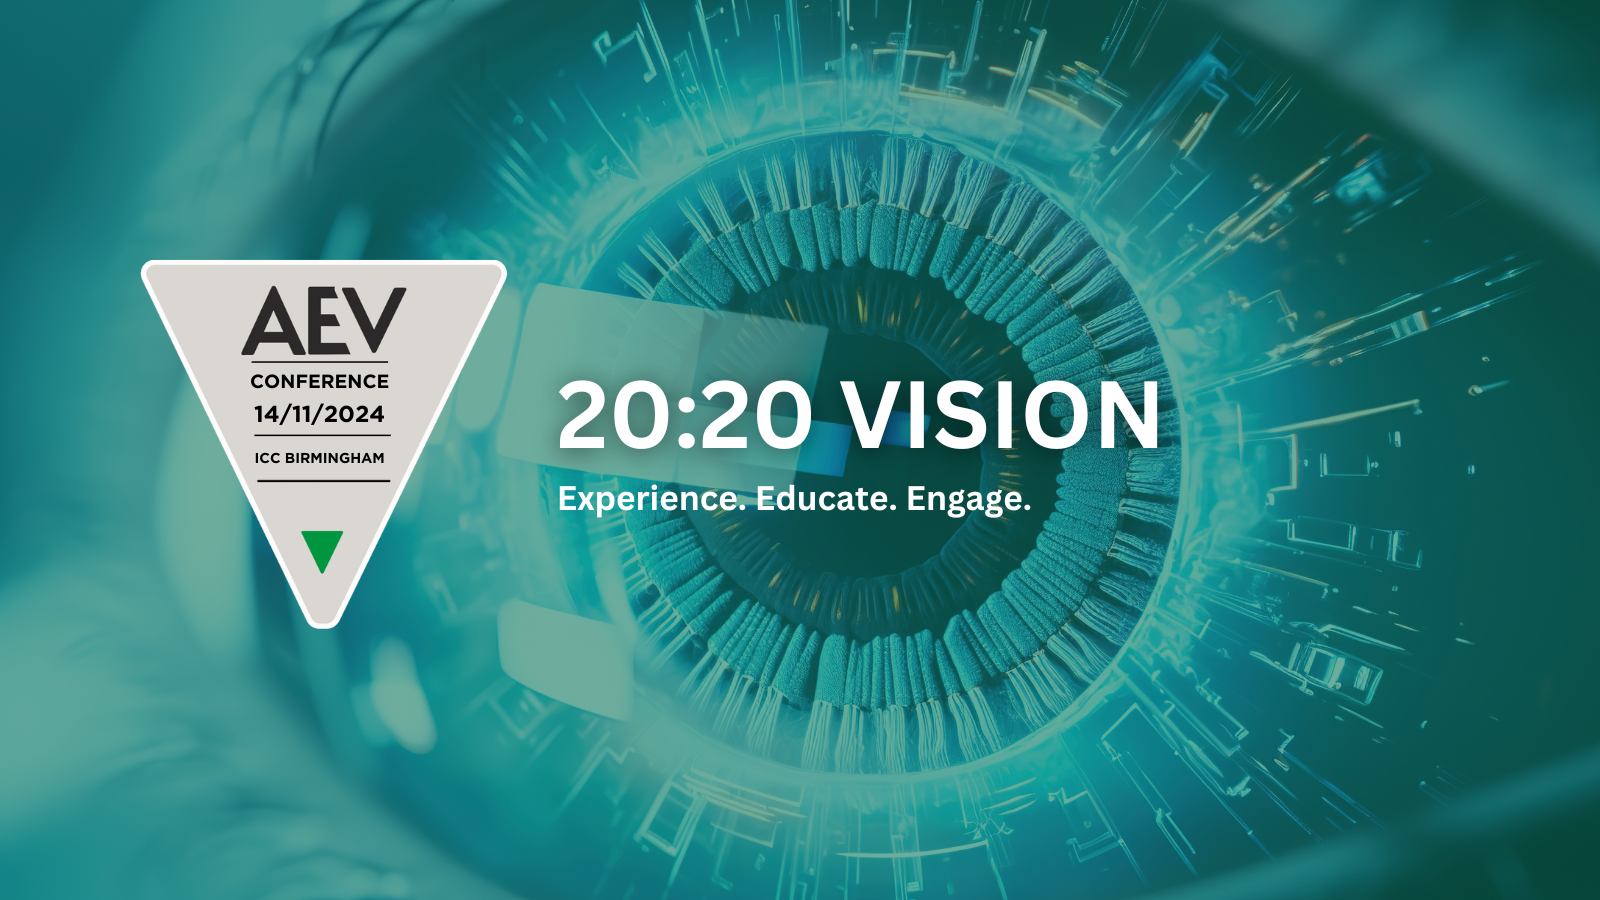 20:20 vision – AEV gets ready to experience, educate, engage.